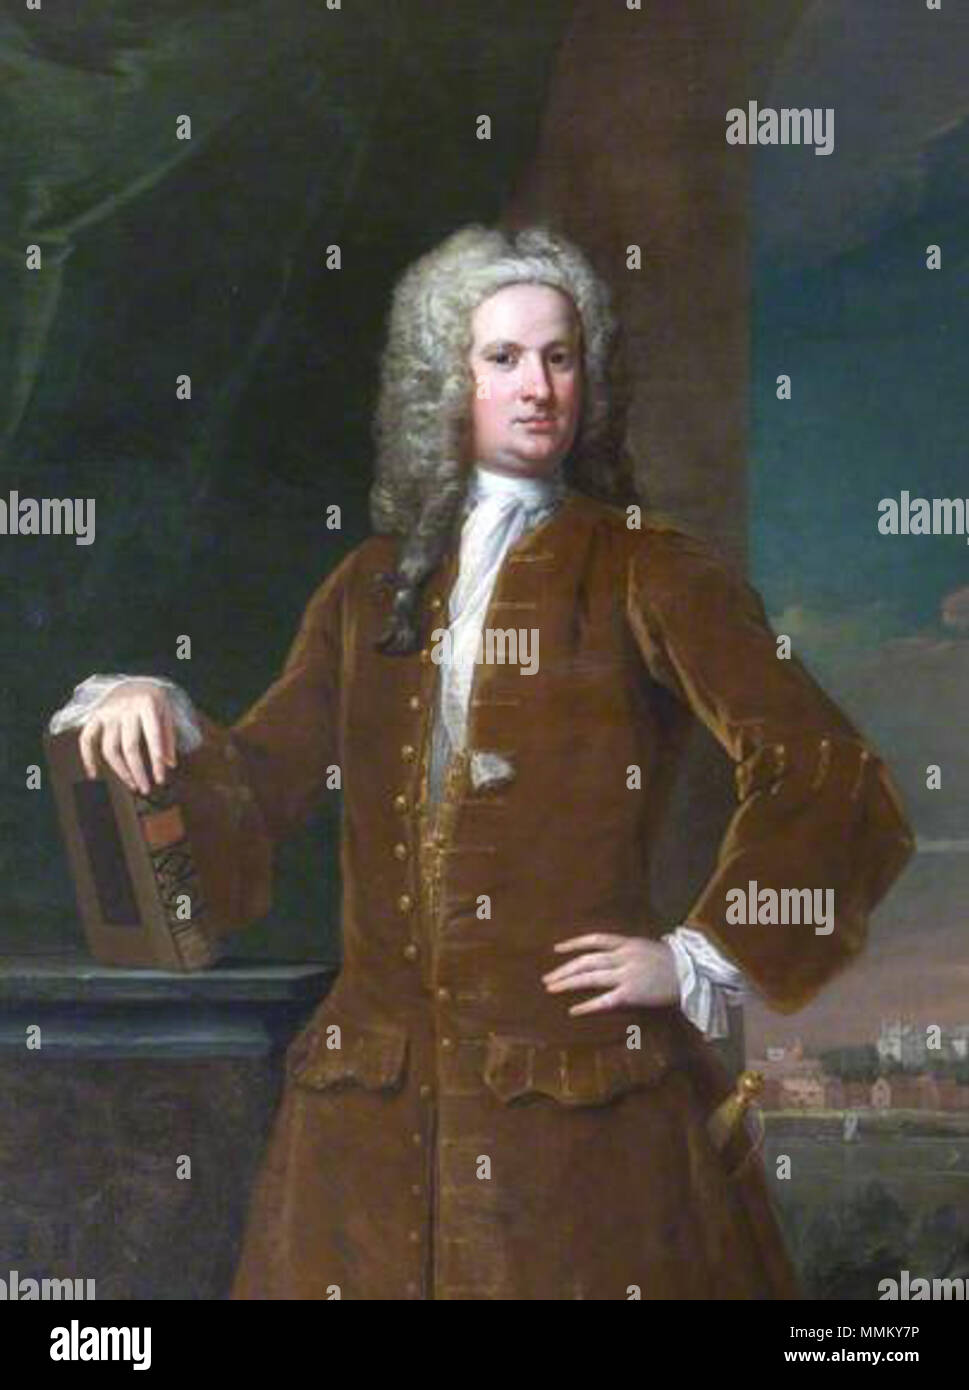 .  English: Edmund Prideaux (1693-1745) of Prideaux Place, Cornwall. 'The sitter is identifiable by the coat of arms on the plinth and by his connections with the Hobarts of Blickling, where this hangs amongst other portraits of ‘Norfolk Worthies’. Although he was from an ancient Cornish family, Edmund was associated with Norwich. His father, the noted Orientalist, Humphrey Prideaux, was Dean of Norwich, and Edmund married Hannah Wrench, who came from that city. He made a Grand Tour of Italy (probably in 1739), during which he collected a number of Roman antiquities and pictures. Afterwards, h Stock Photo